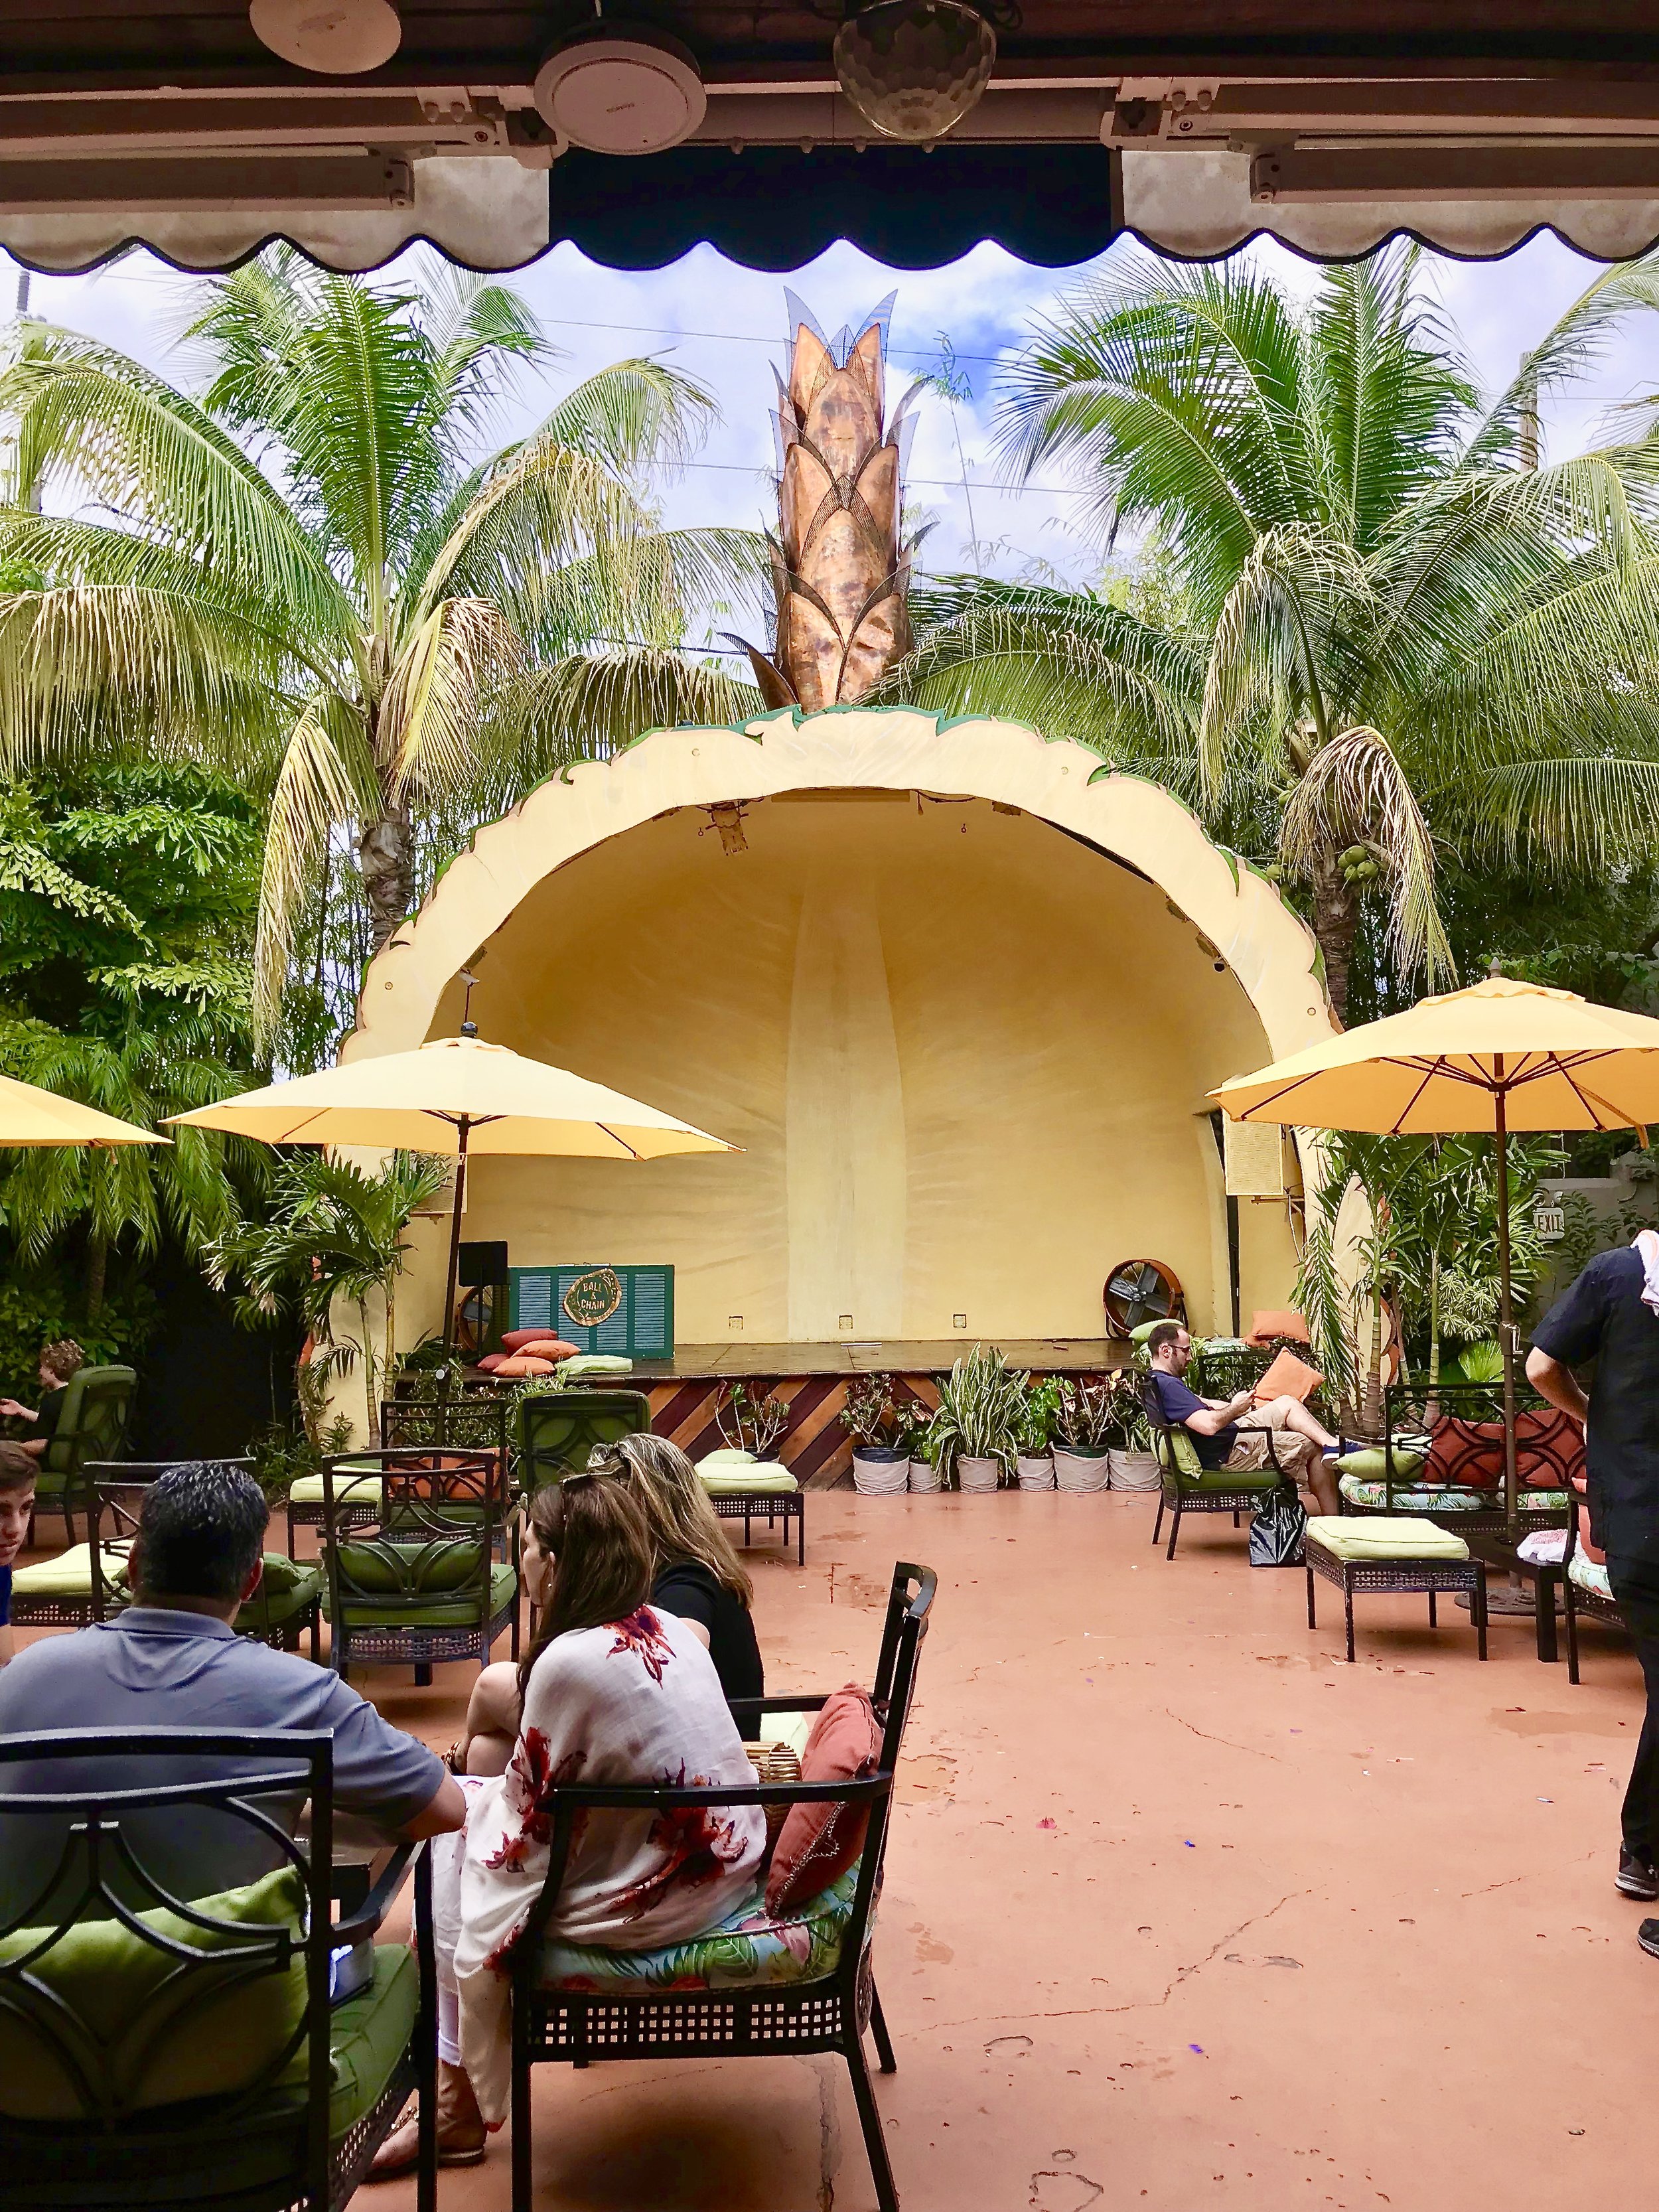 How to Spend an Afternoon in Little Havana